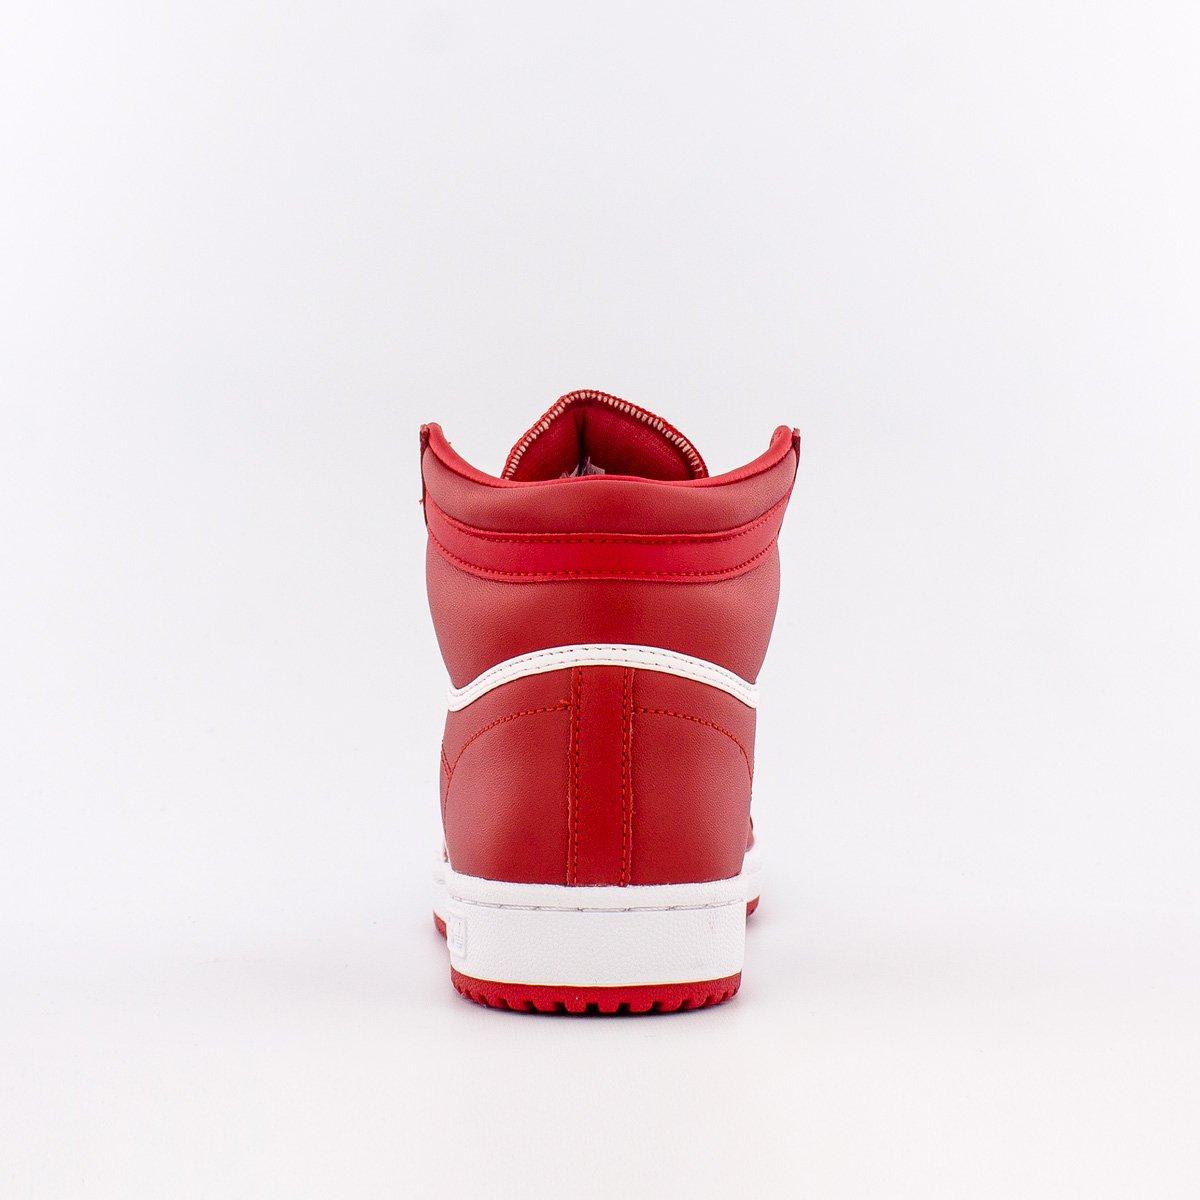 adidas Leather Top Ten Hi in Red/White (Red) for Men - Save 59% - Lyst